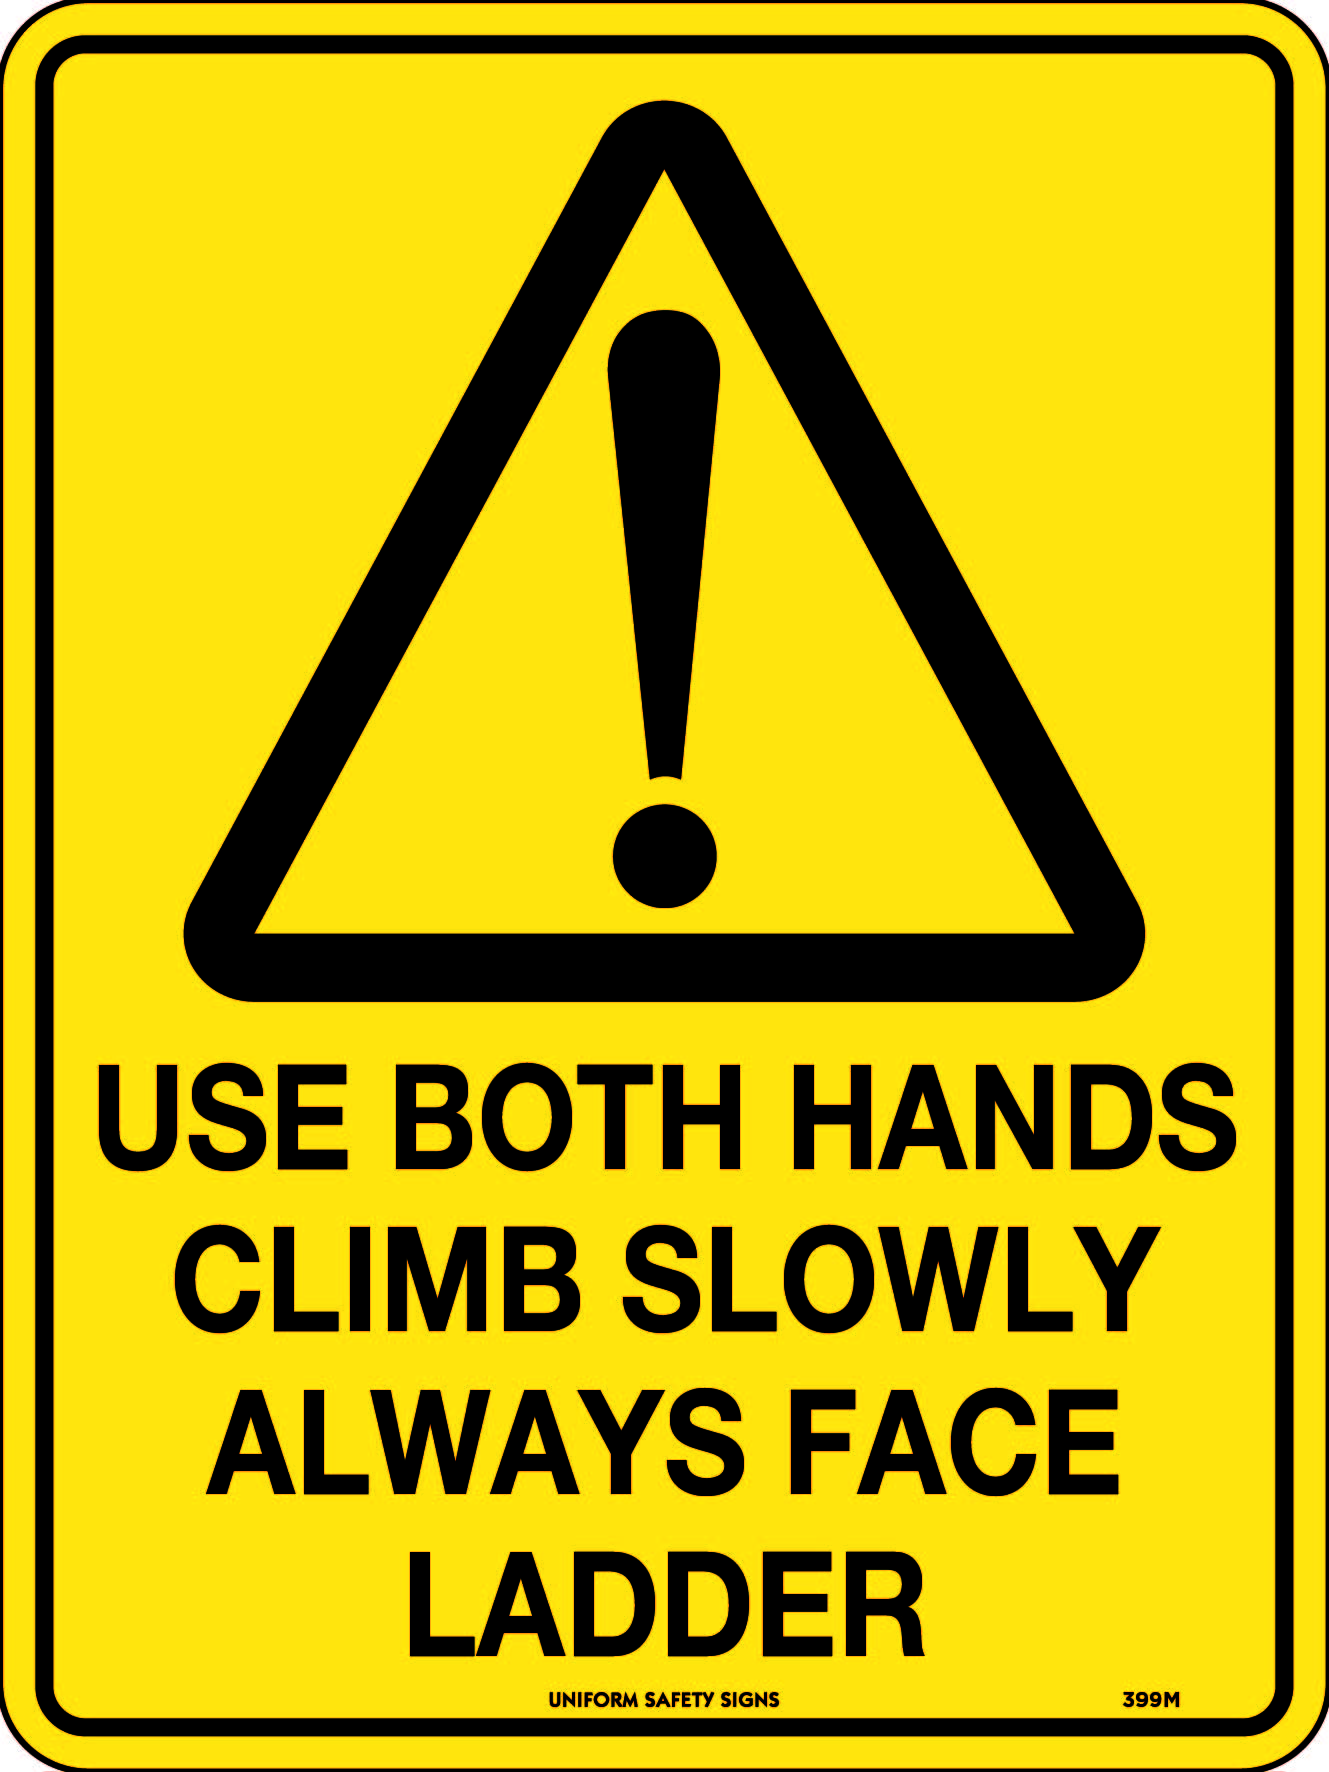 SIGN WARNING BOTH HANDS CLIMB SLOW ALWAYS FACE LADDER 300X225 METAL 196W